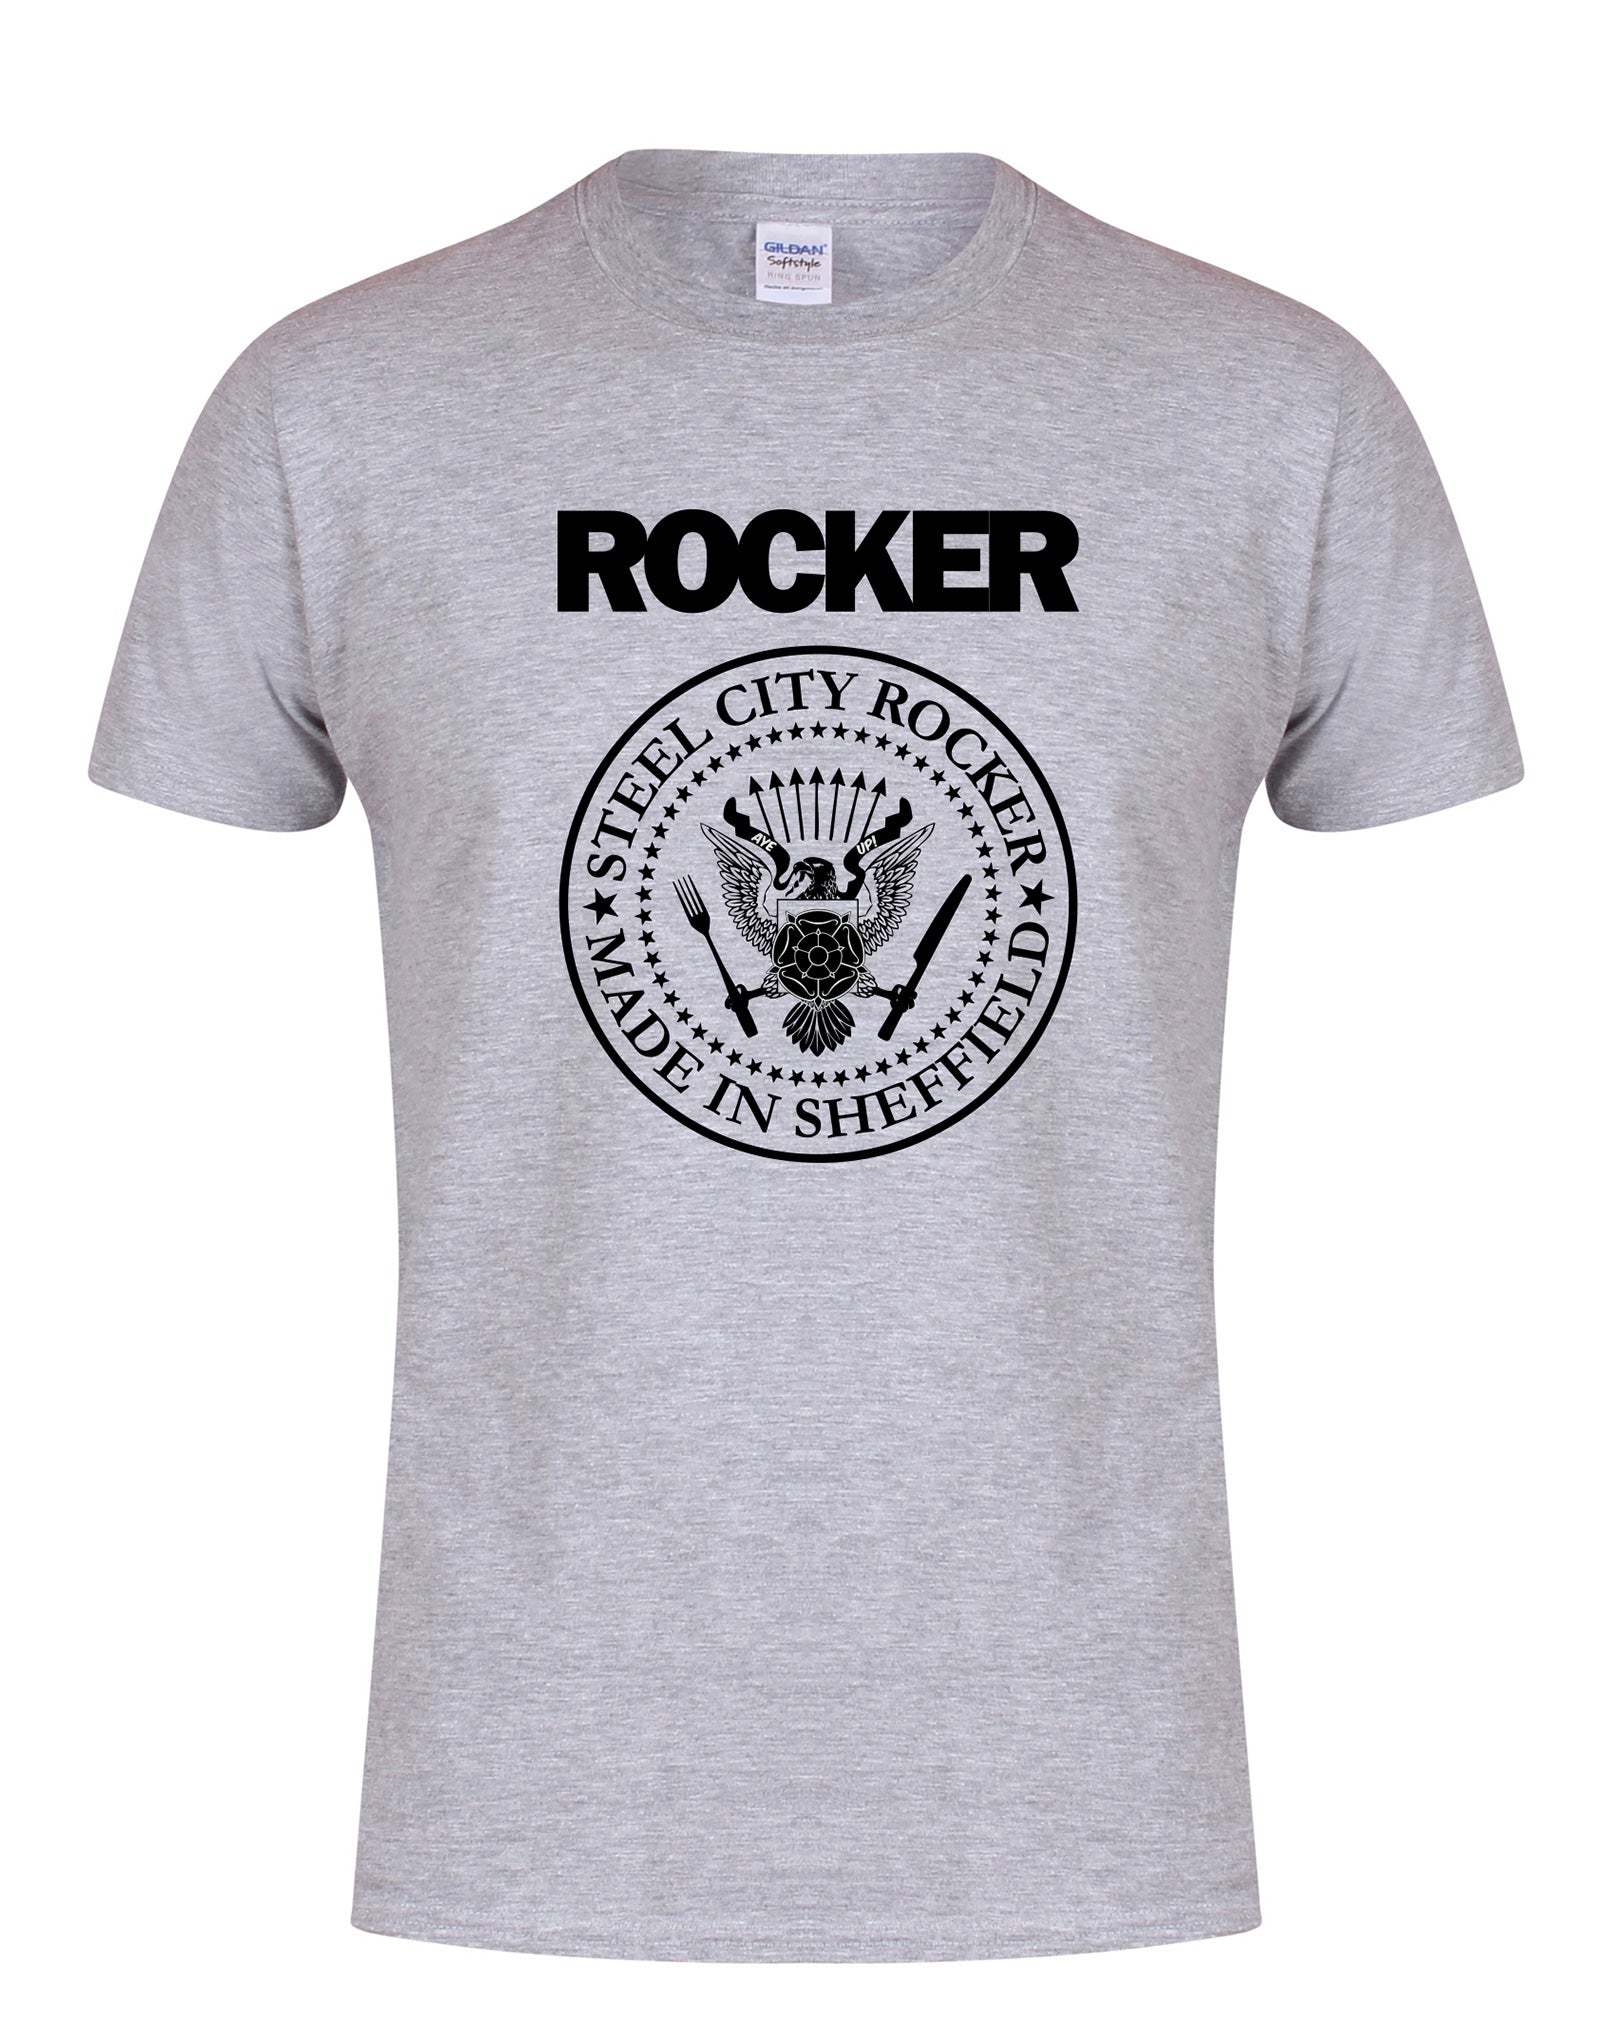 Steel City Rocker - Ramones design T-shirt - various colours - Dirty Stop Outs